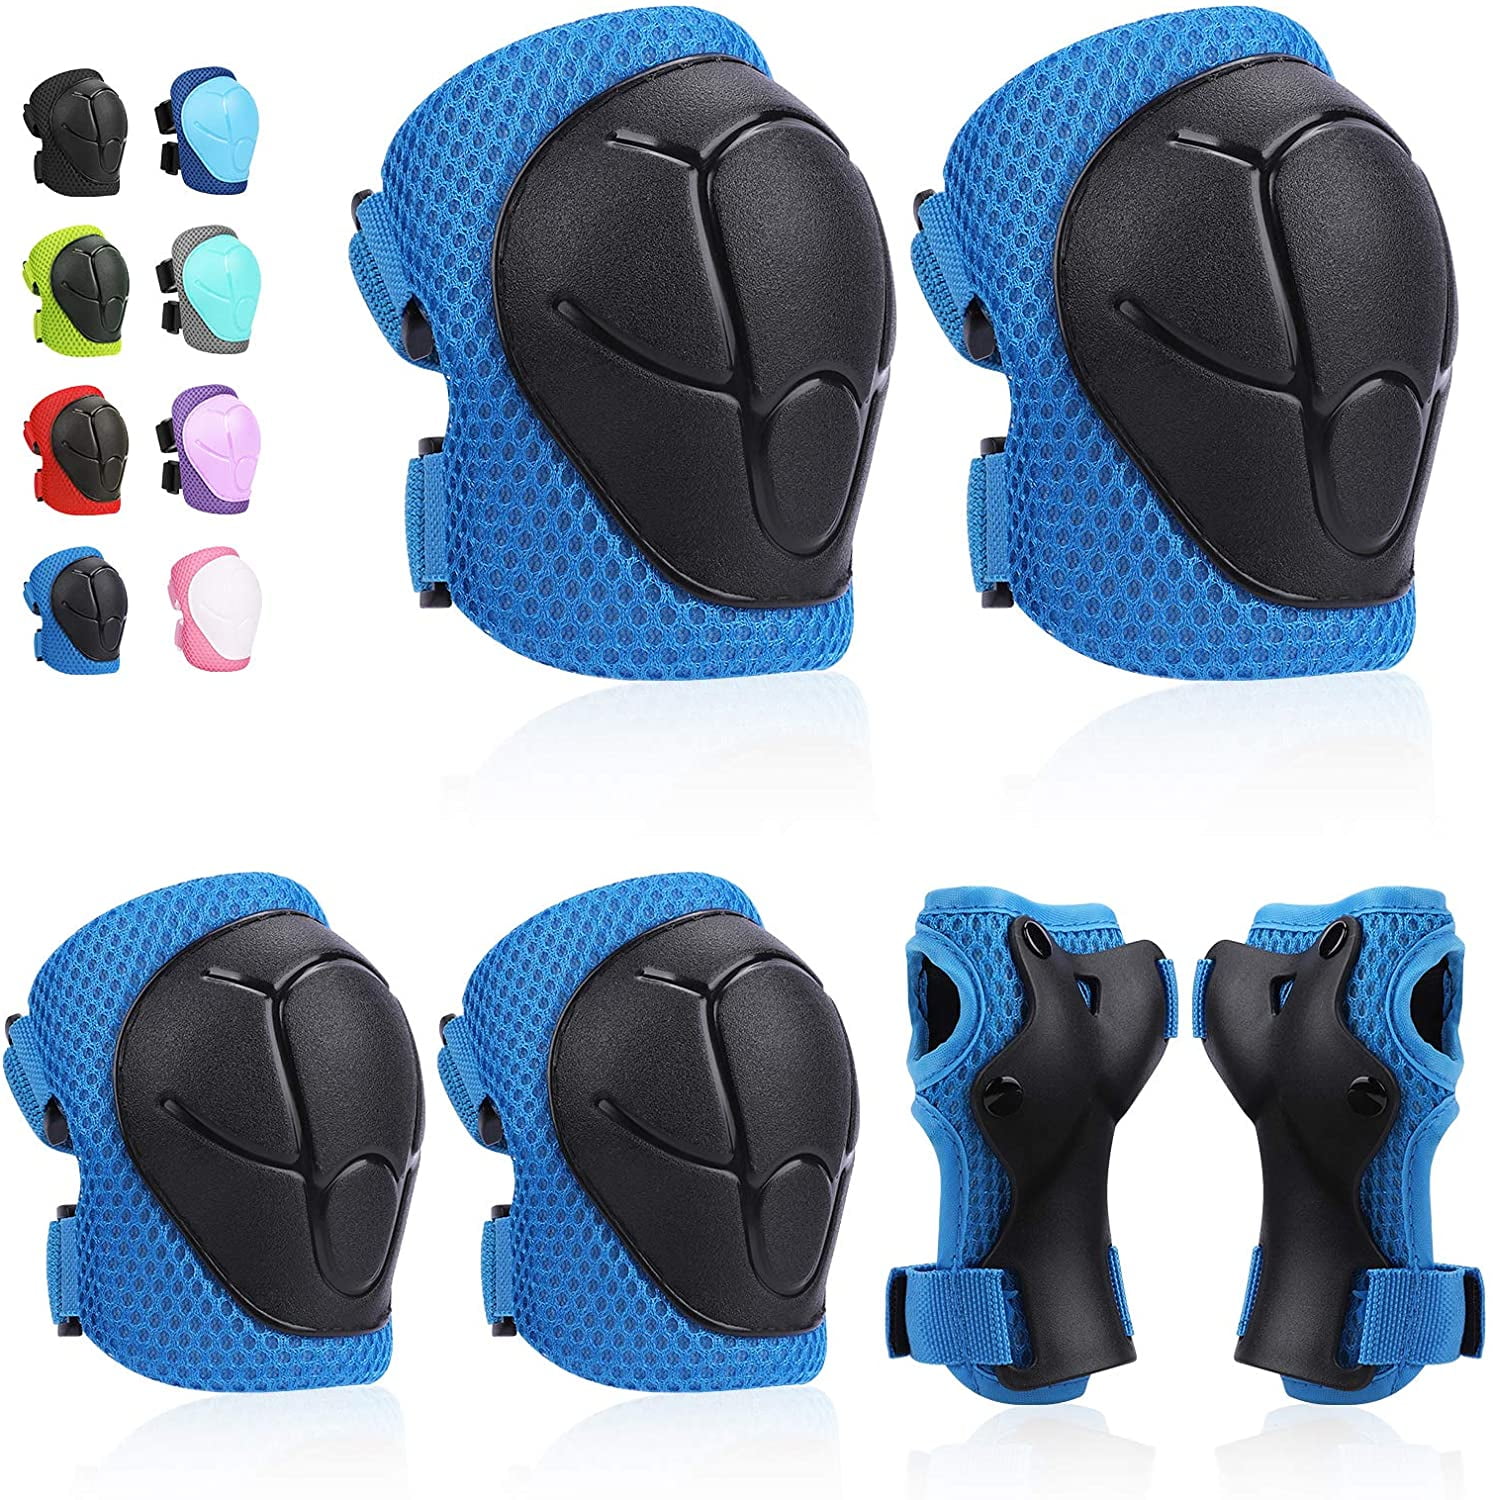 Elbow & Knee Pads 6 PCS Set Child Youth Adults Safety Protective Gear Adjustable Knee Elbow Pads Wrist Brace for Cycling Skating Rollerblading 